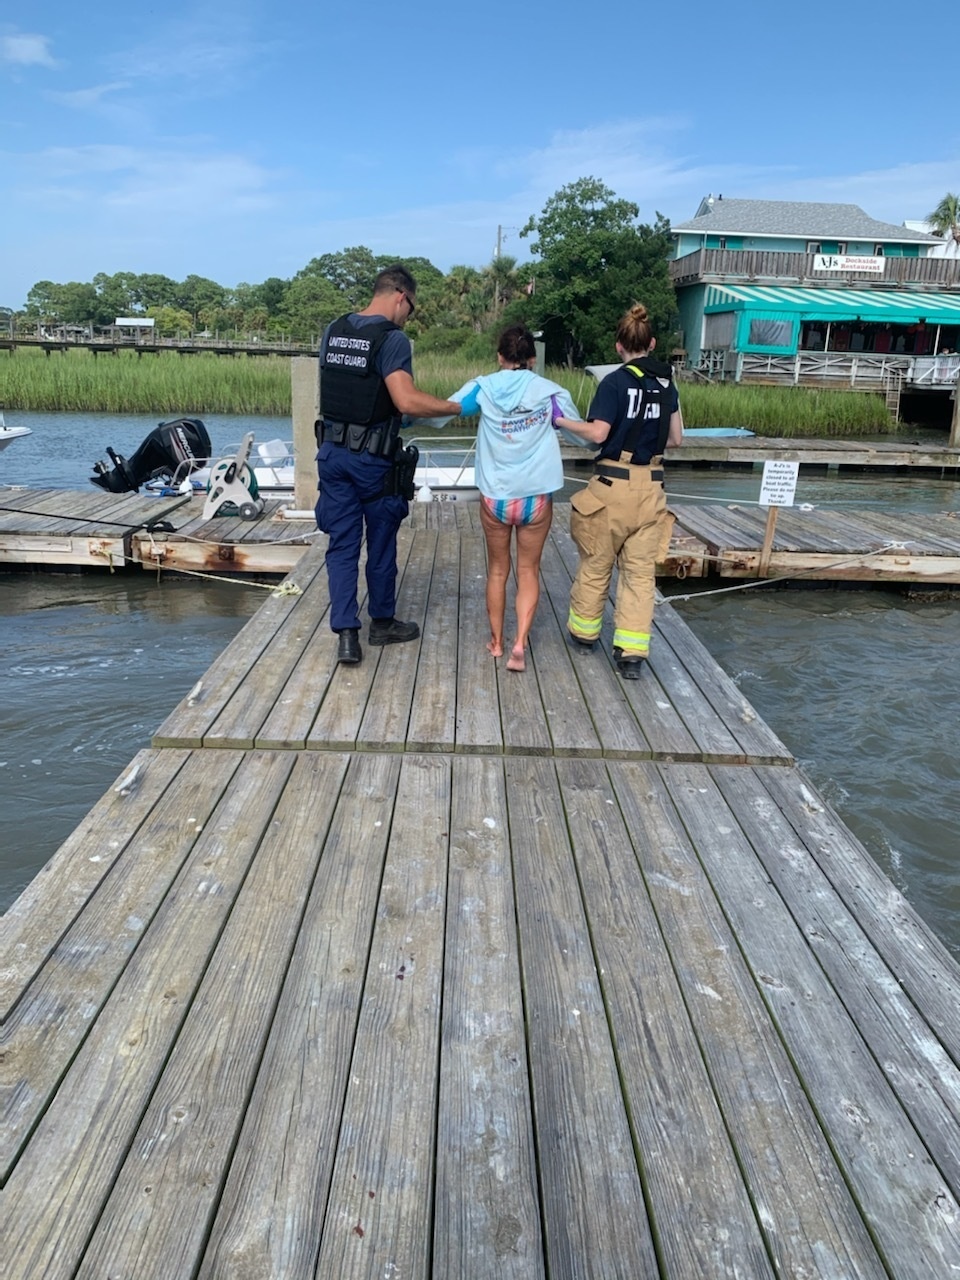 Coast Guard, local agencies rescue 9 from aground vessel on Tybee Creek